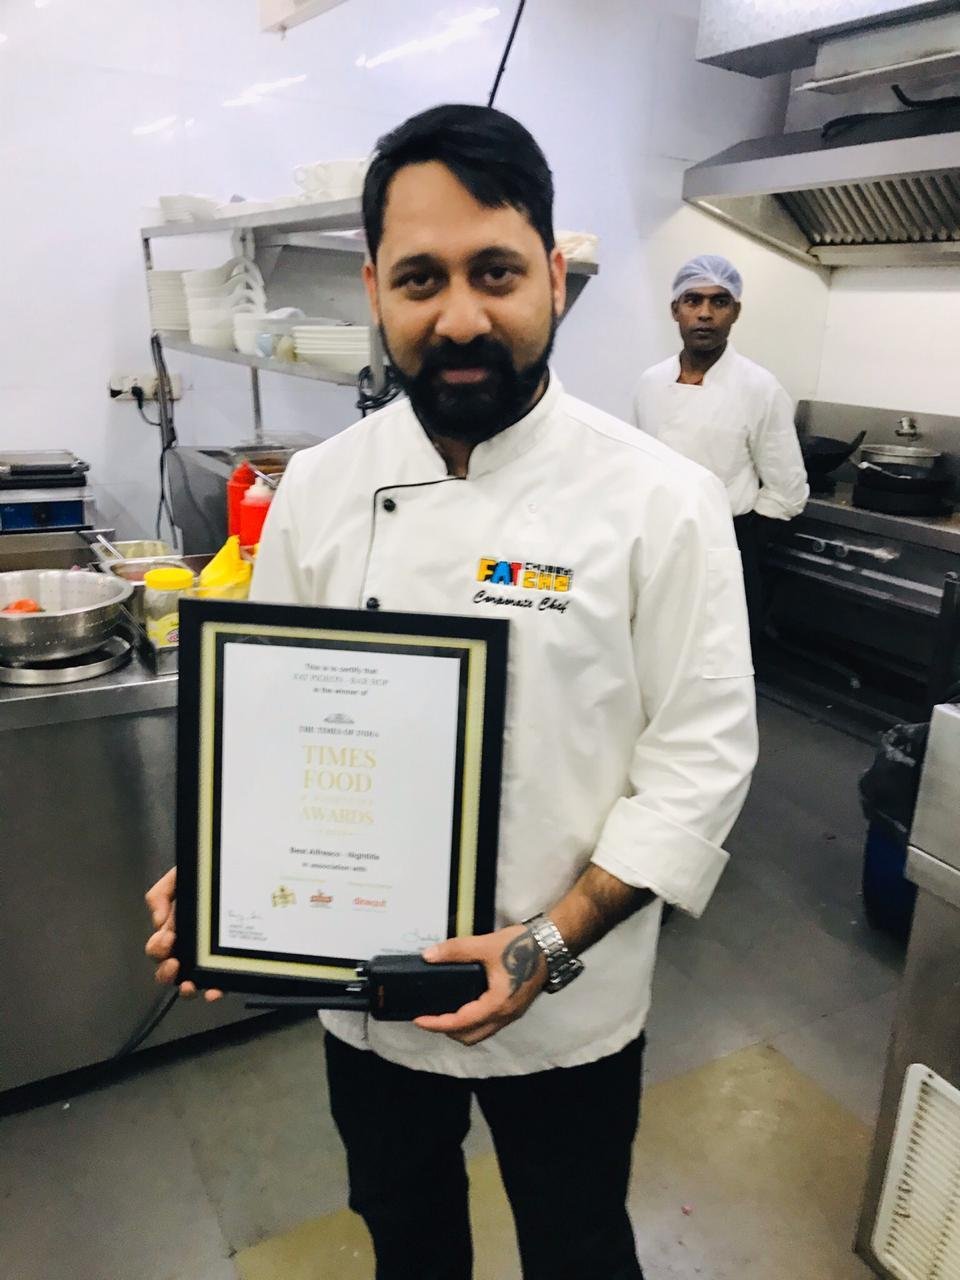 second best alfresco times food award for 2020